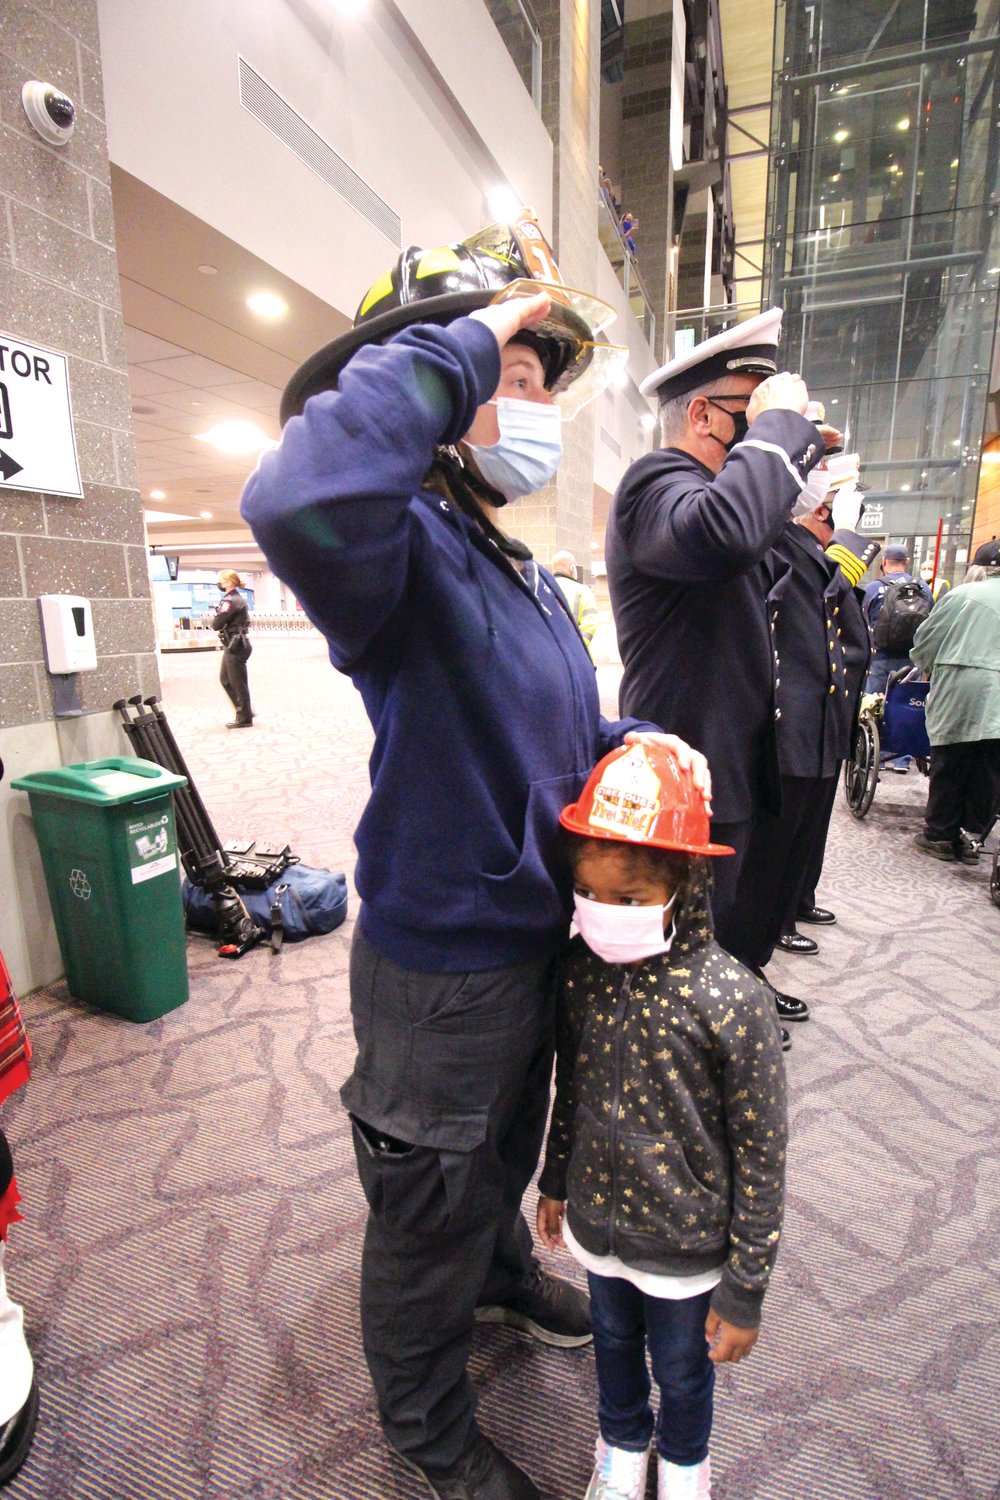 SALUTING THEIR SERVICE: Cranston firefighter recruit Jesse Ossian, her daughter Jaidyn at her side, welcomes veterans as they arrive at the terminal.